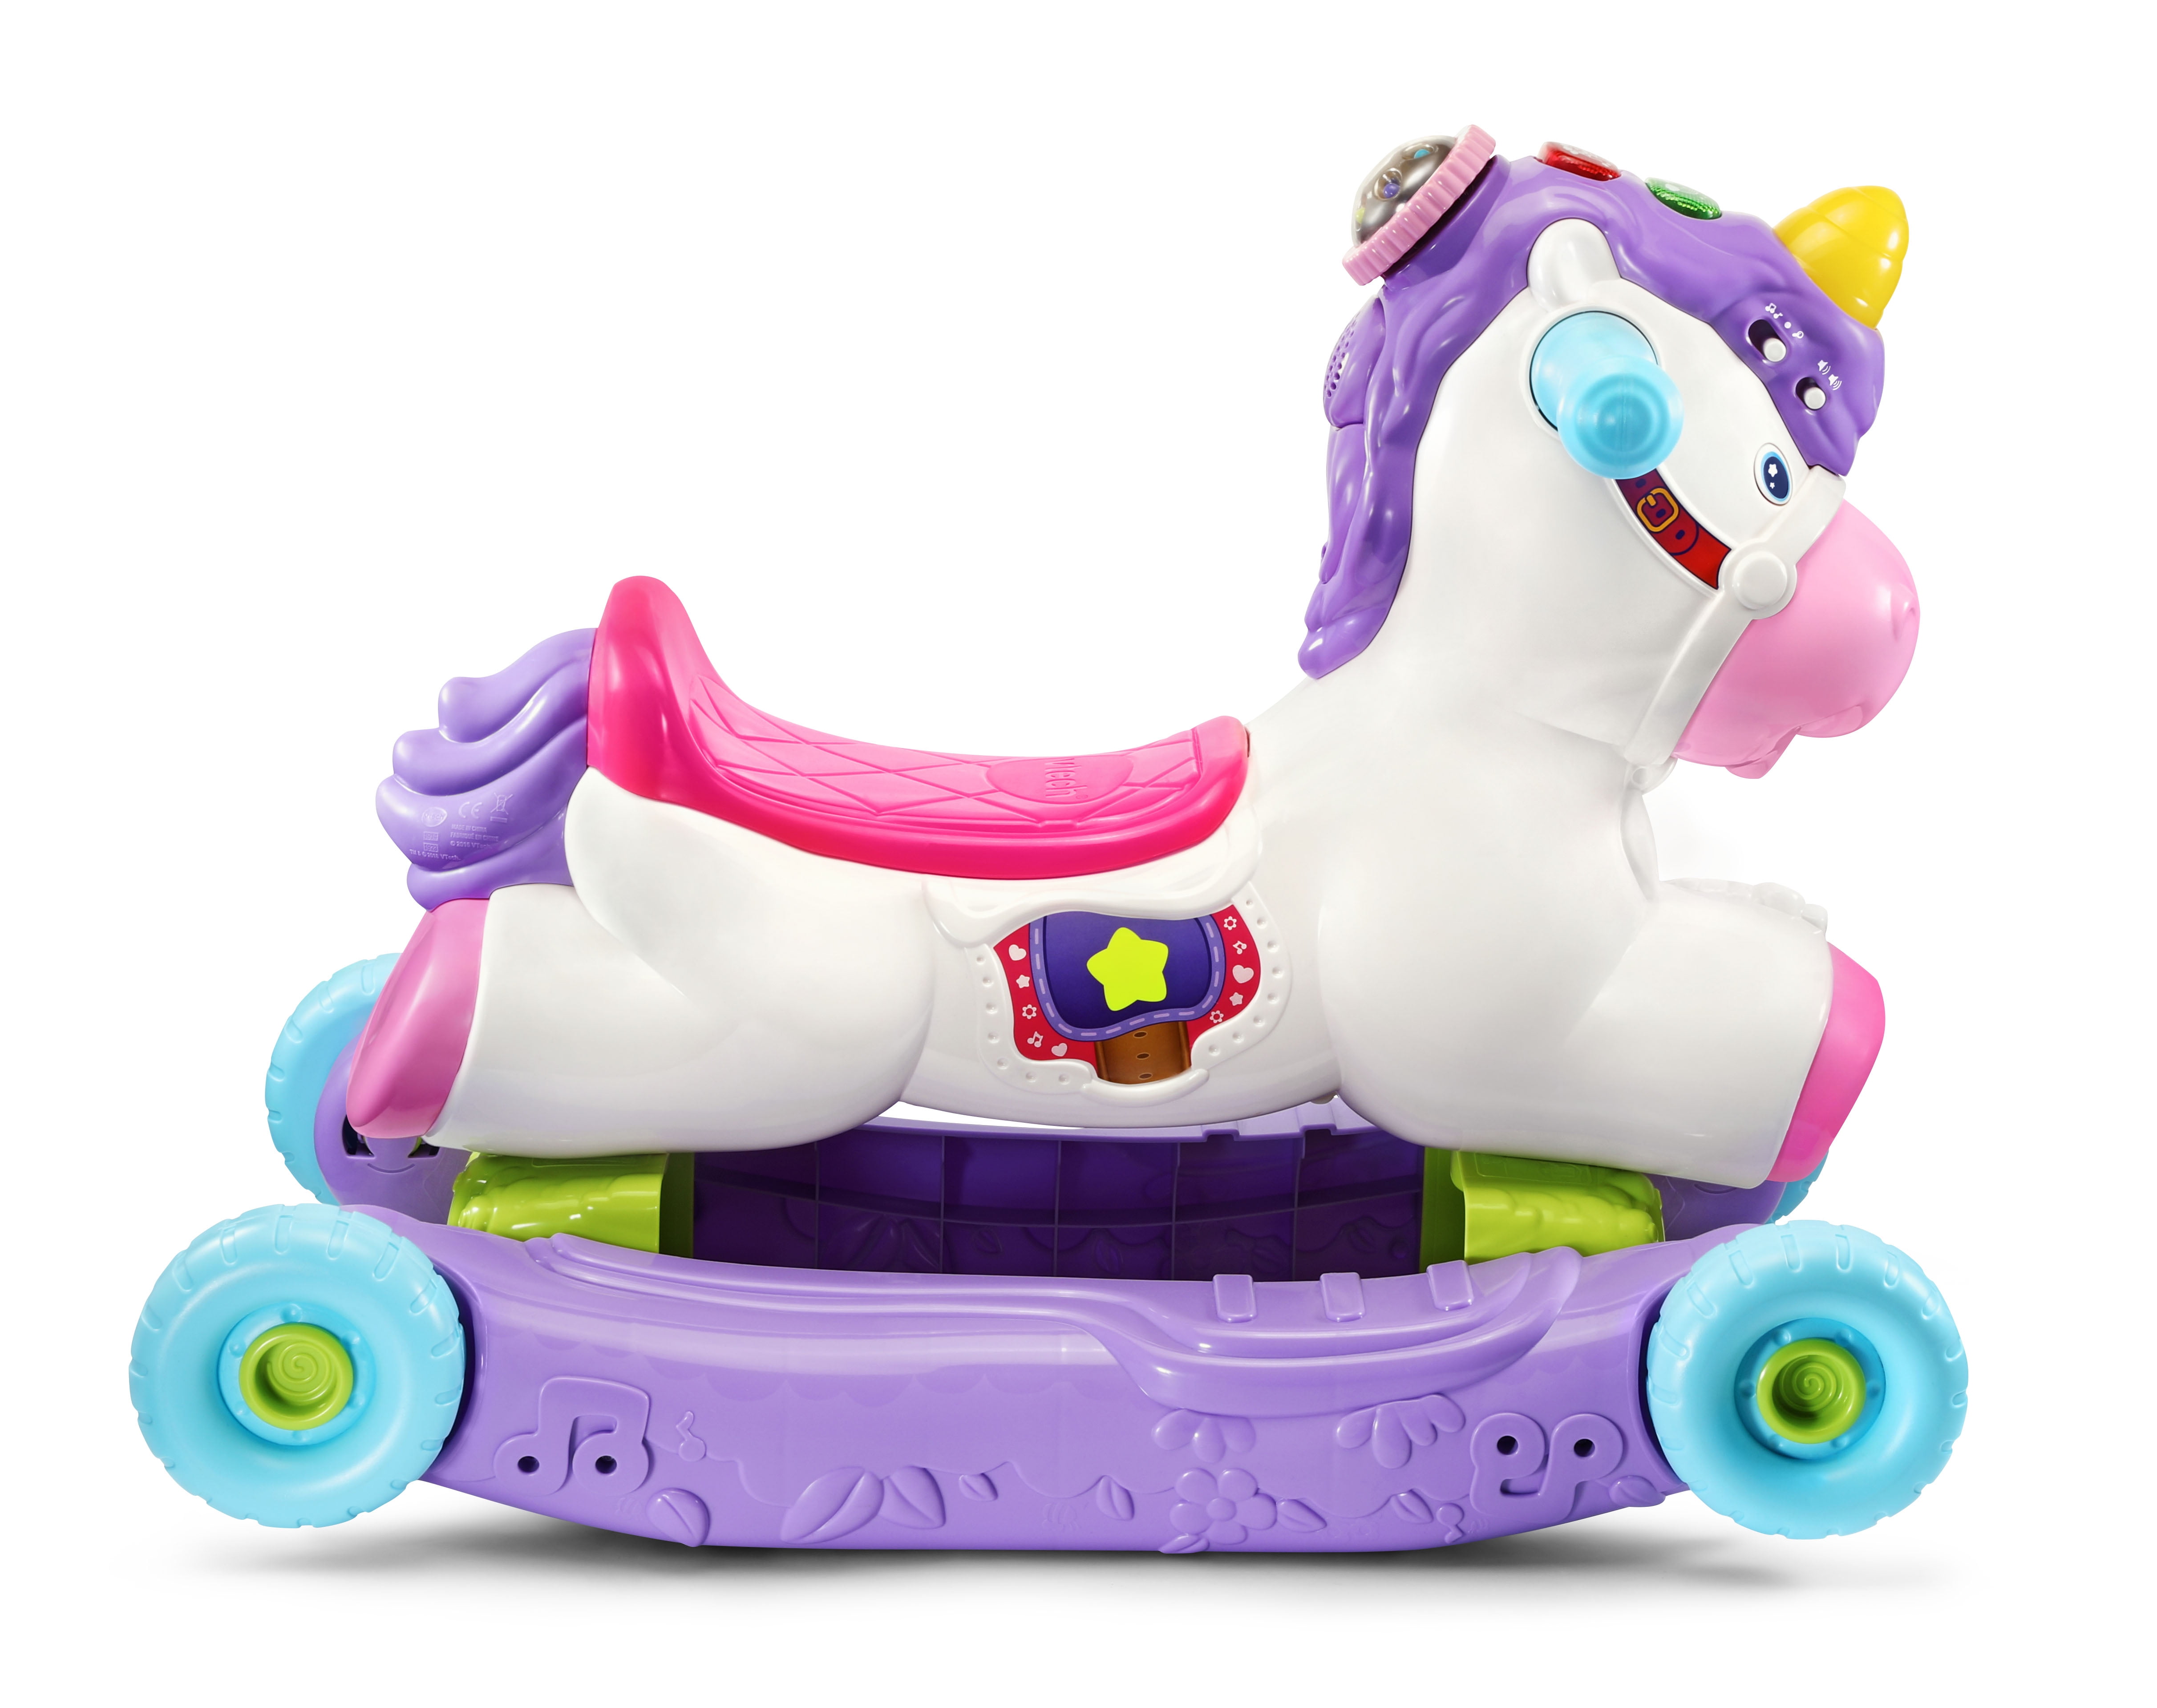 2 and 3 Years Old Interactive Baby Musical Toy with Learning and Sound Features Rocker VTech Rock and Ride Unicorn Baby Ride On Toy First Steps Walking Support for Babies & Toddlers Aged 1